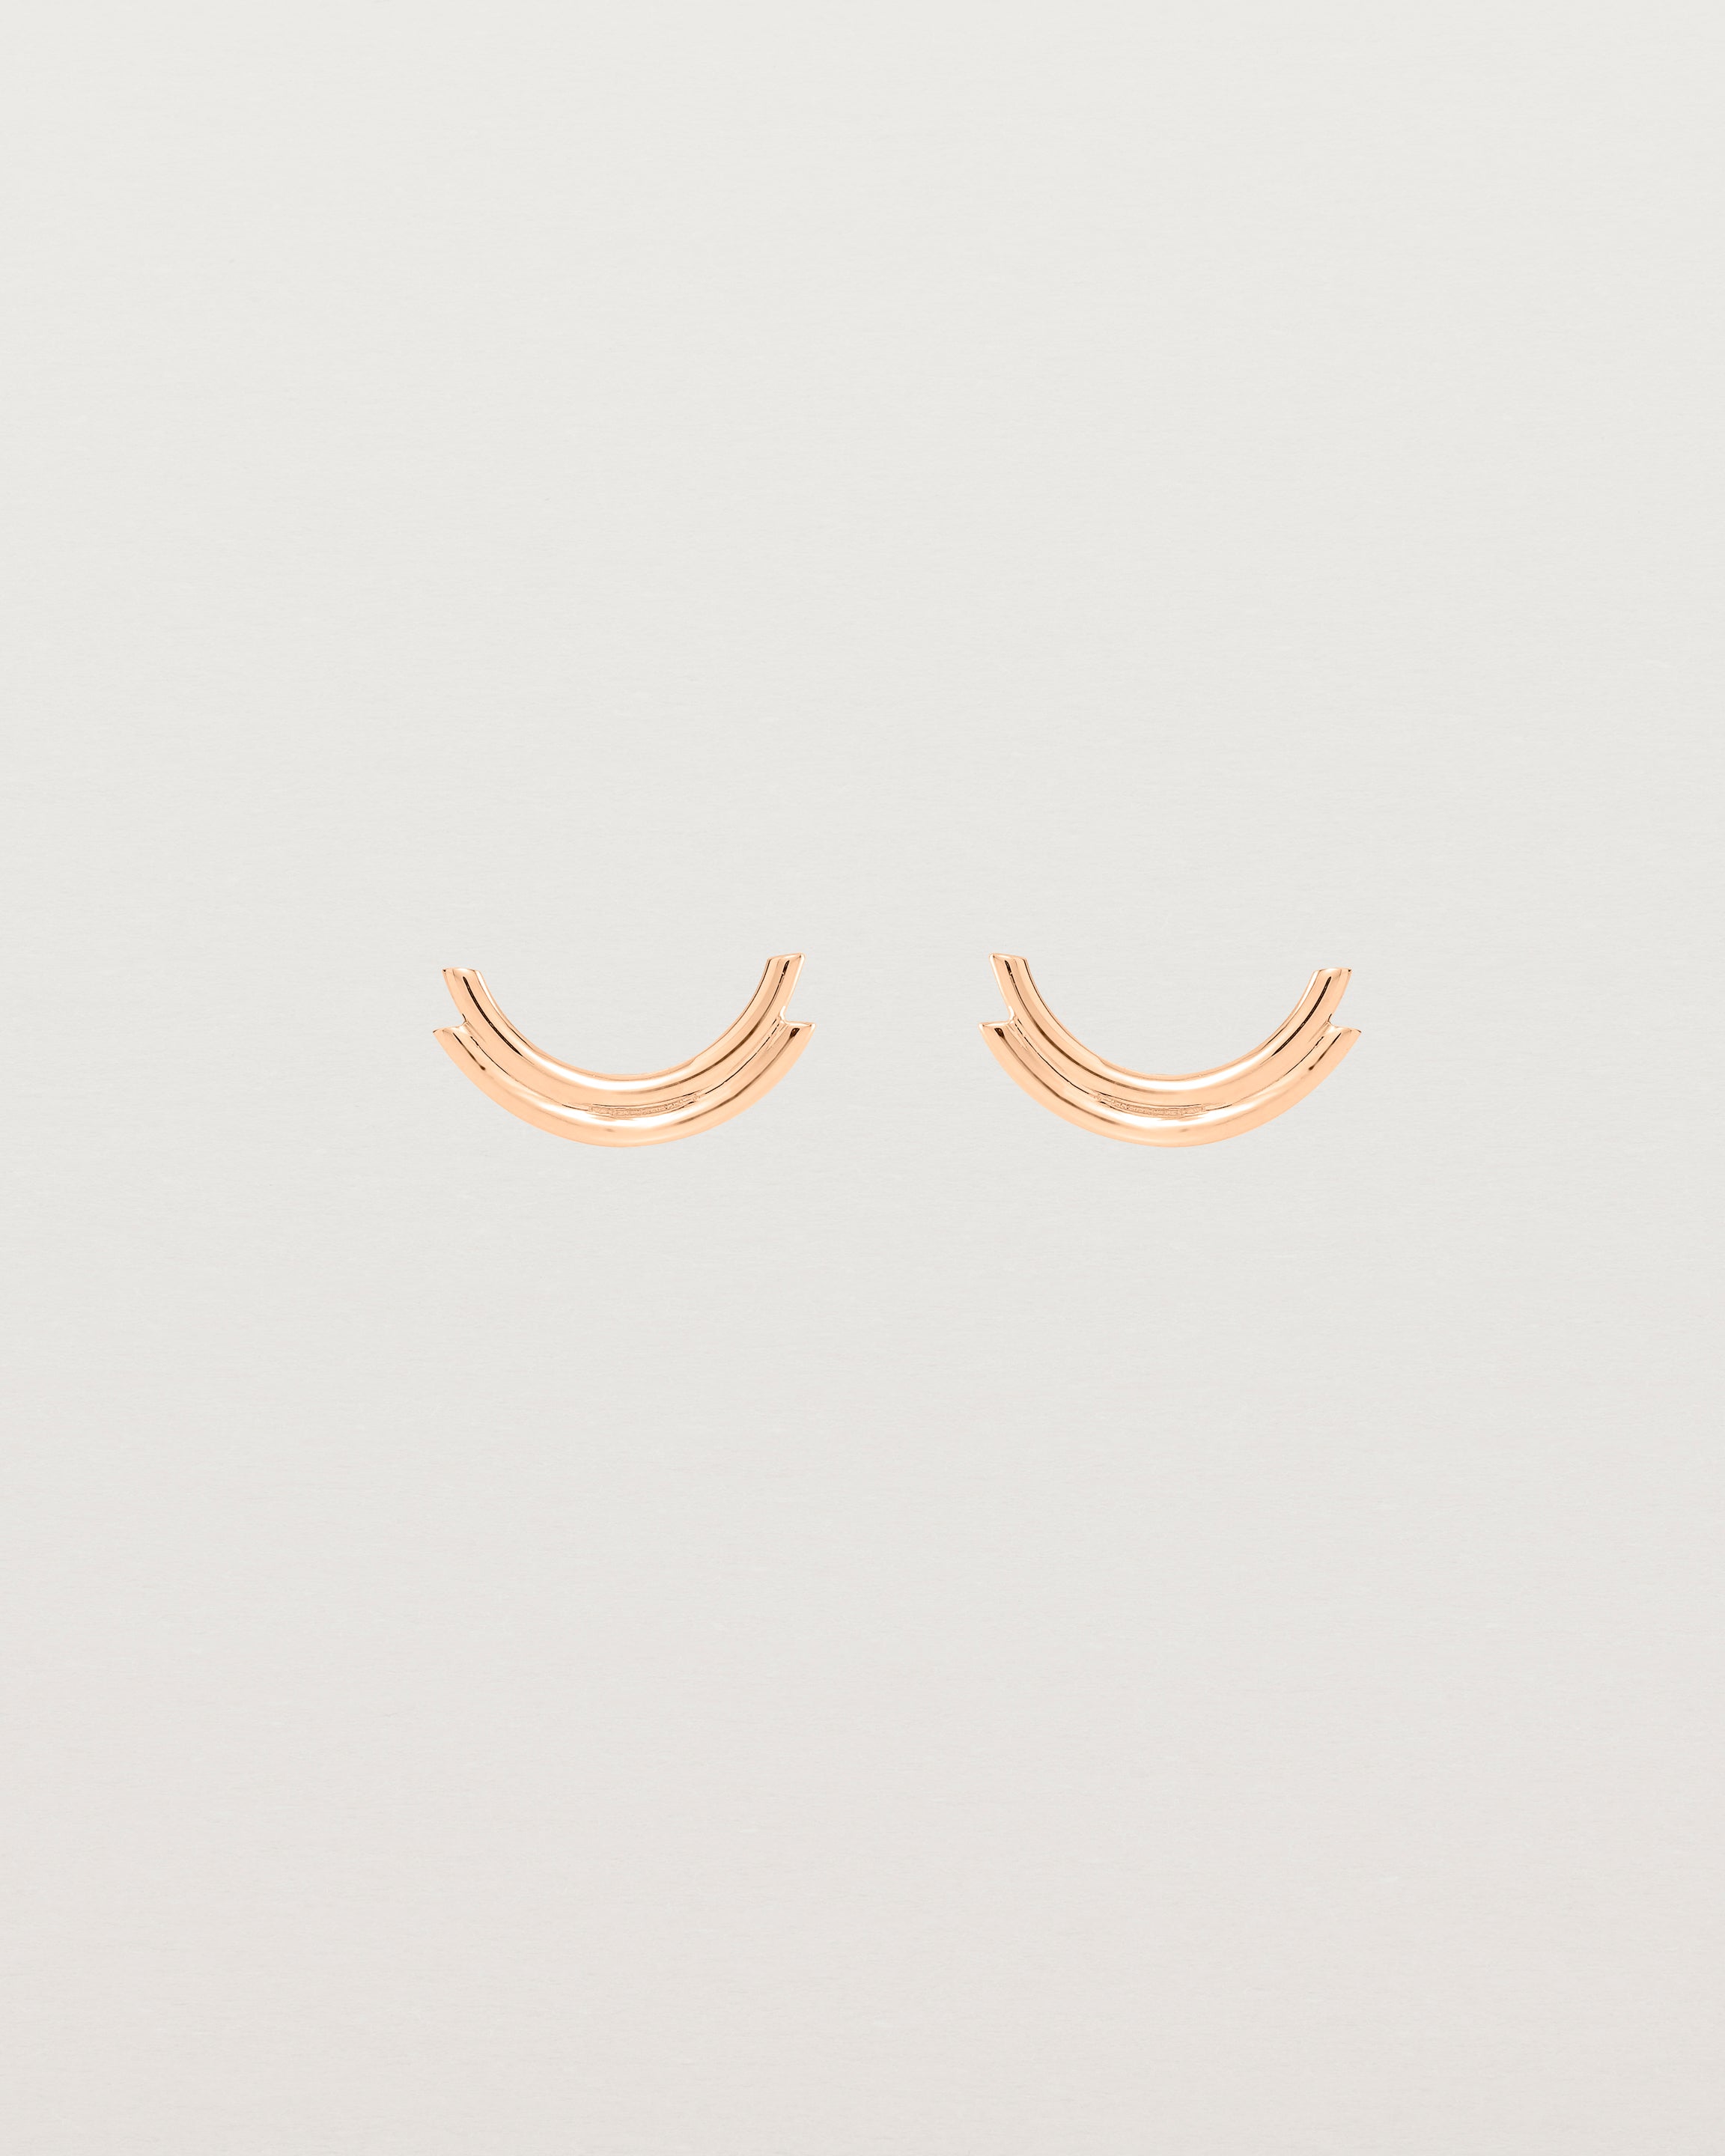 Front view of the Lai Studs in rose gold.